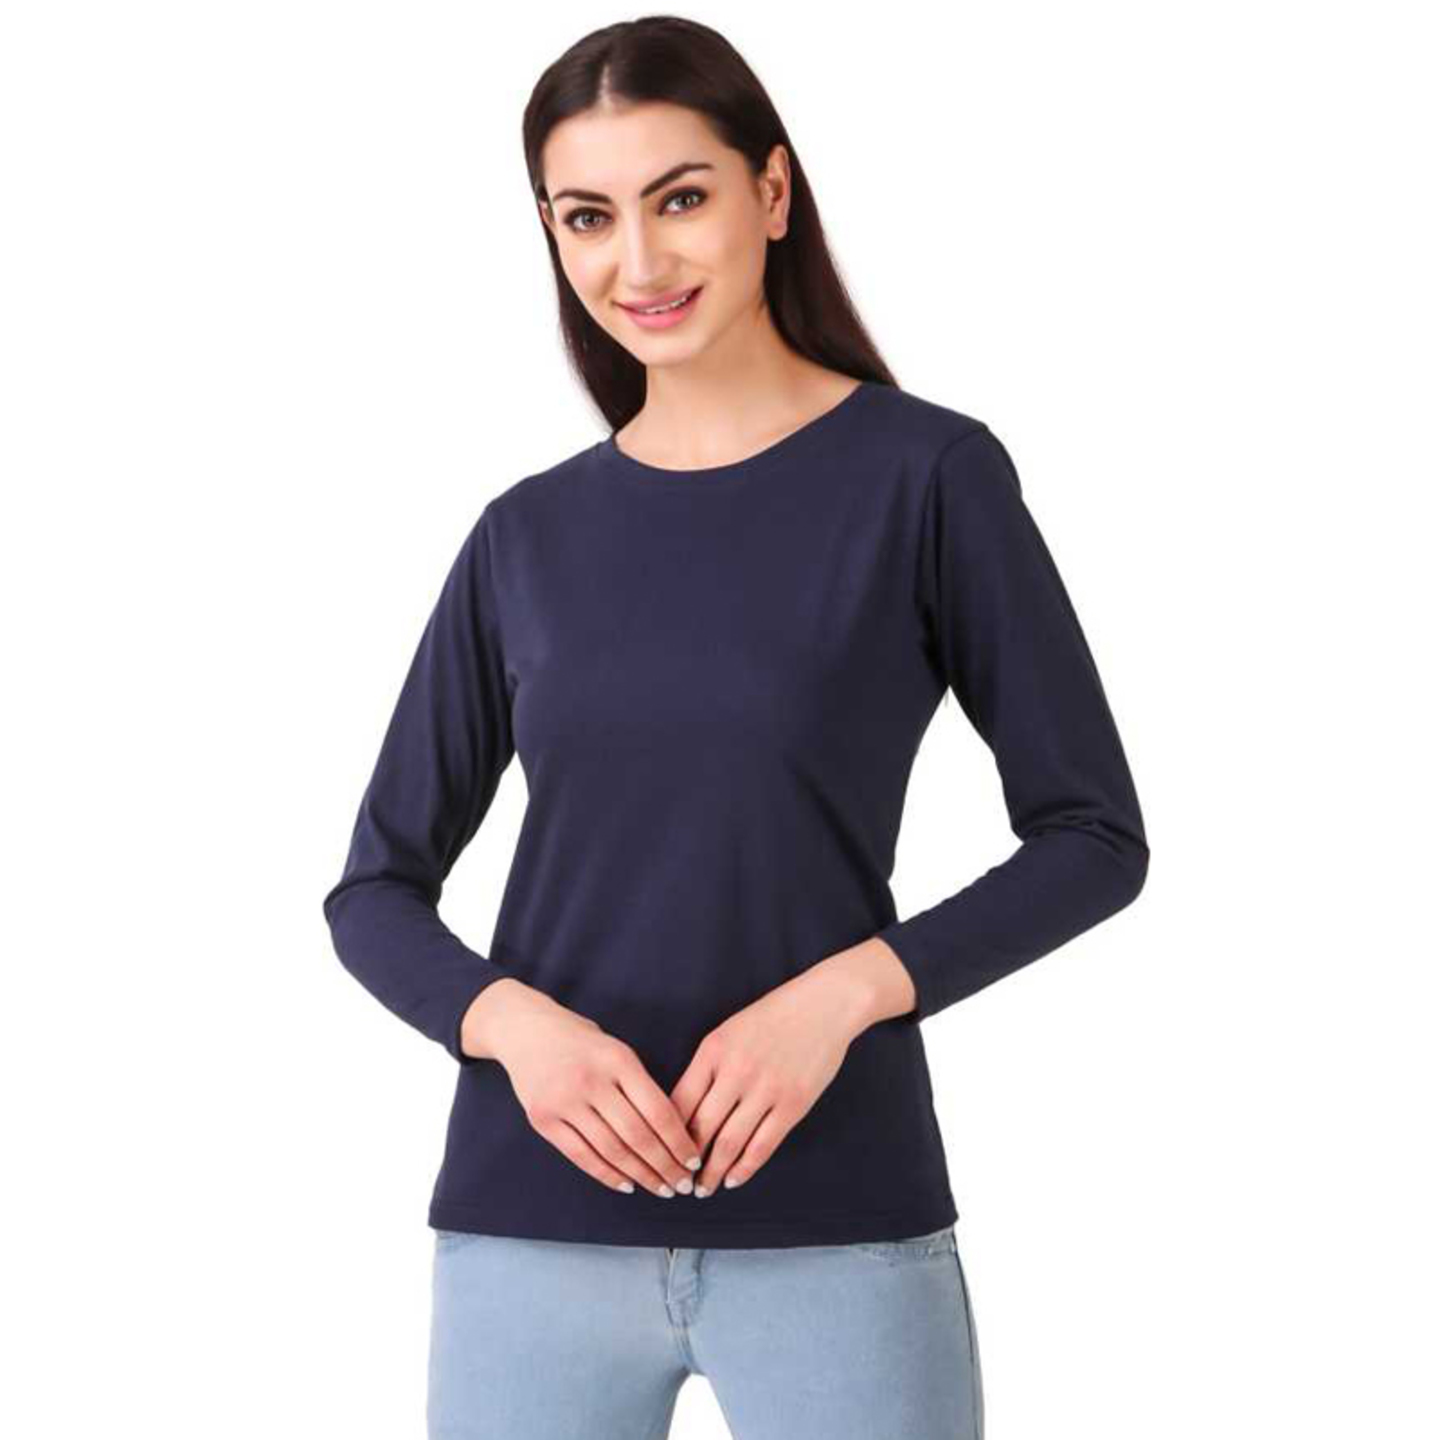 Paretto Navy Blue Full Sleeves Cotton T-shirt for Women